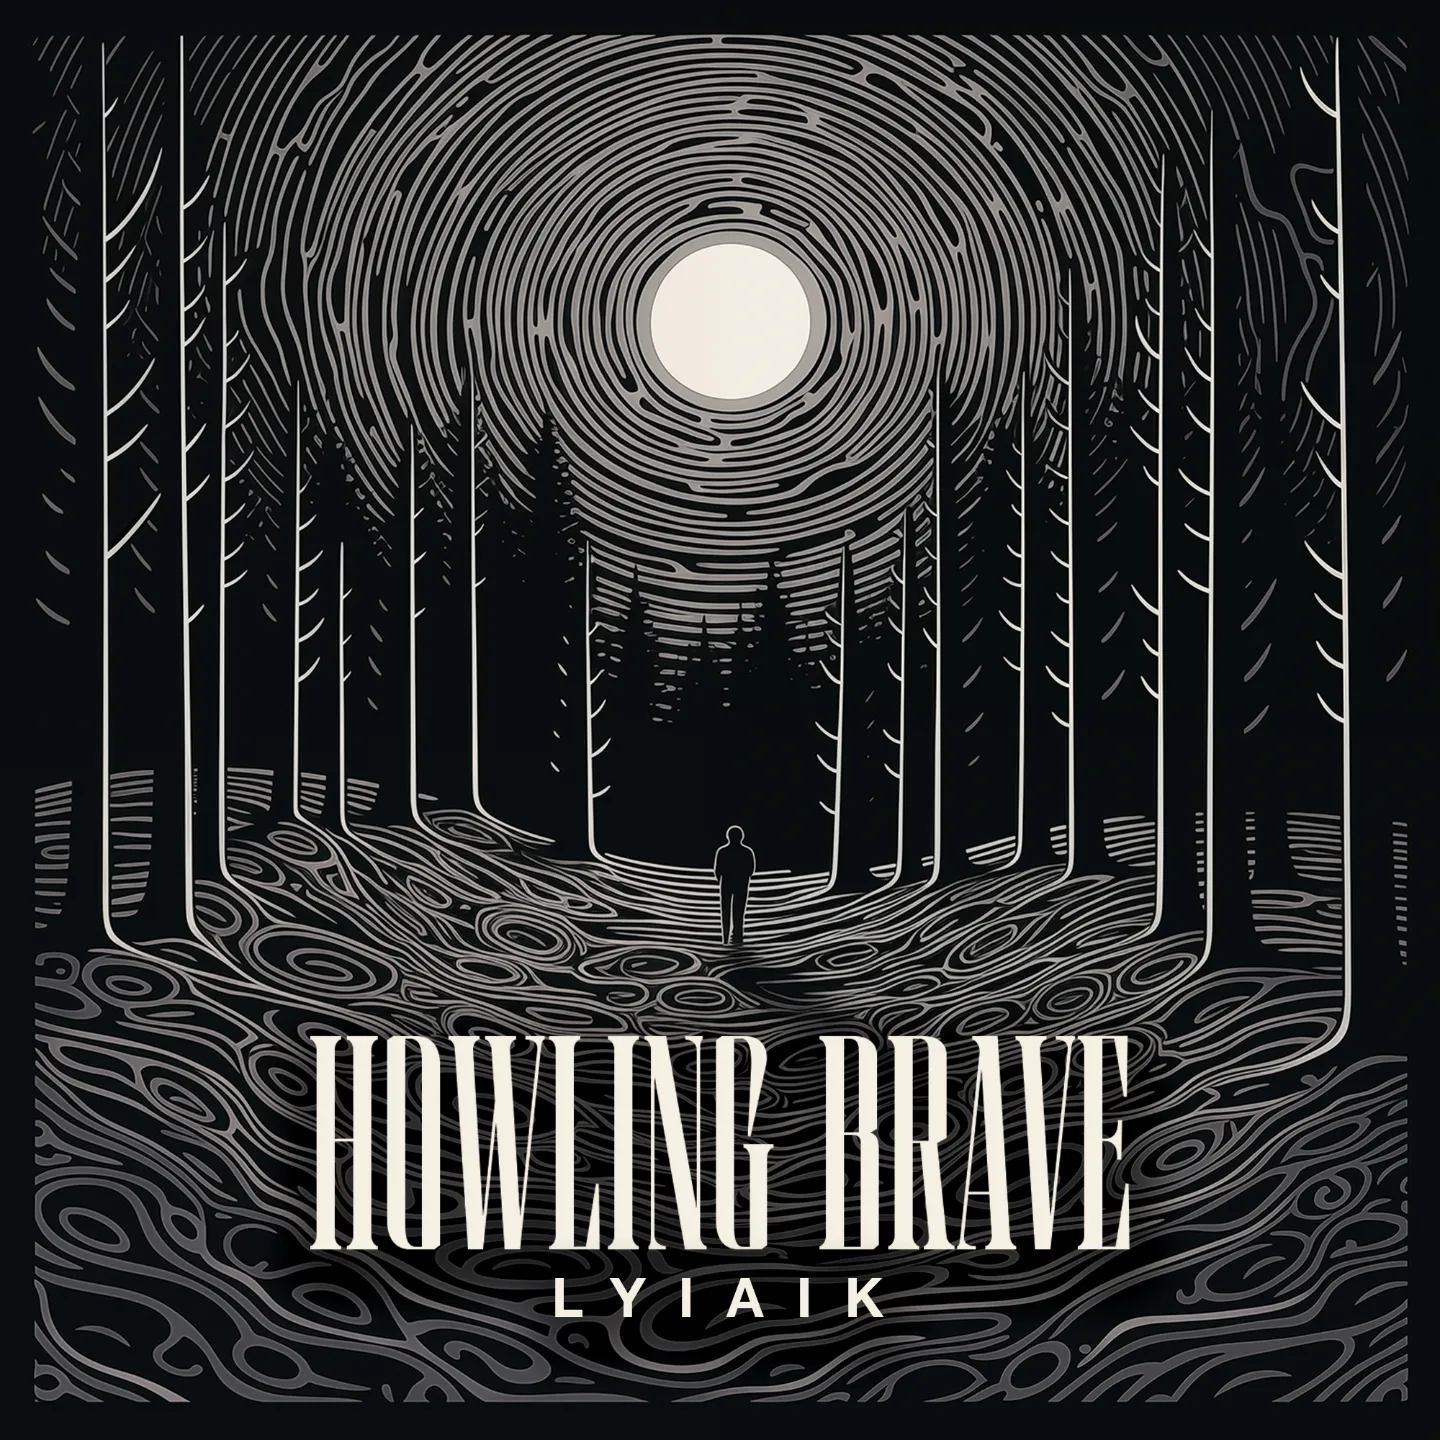 Howling Brave  - "LYIAIK" cover artwork. A forest illustration in black and white with a full moon.